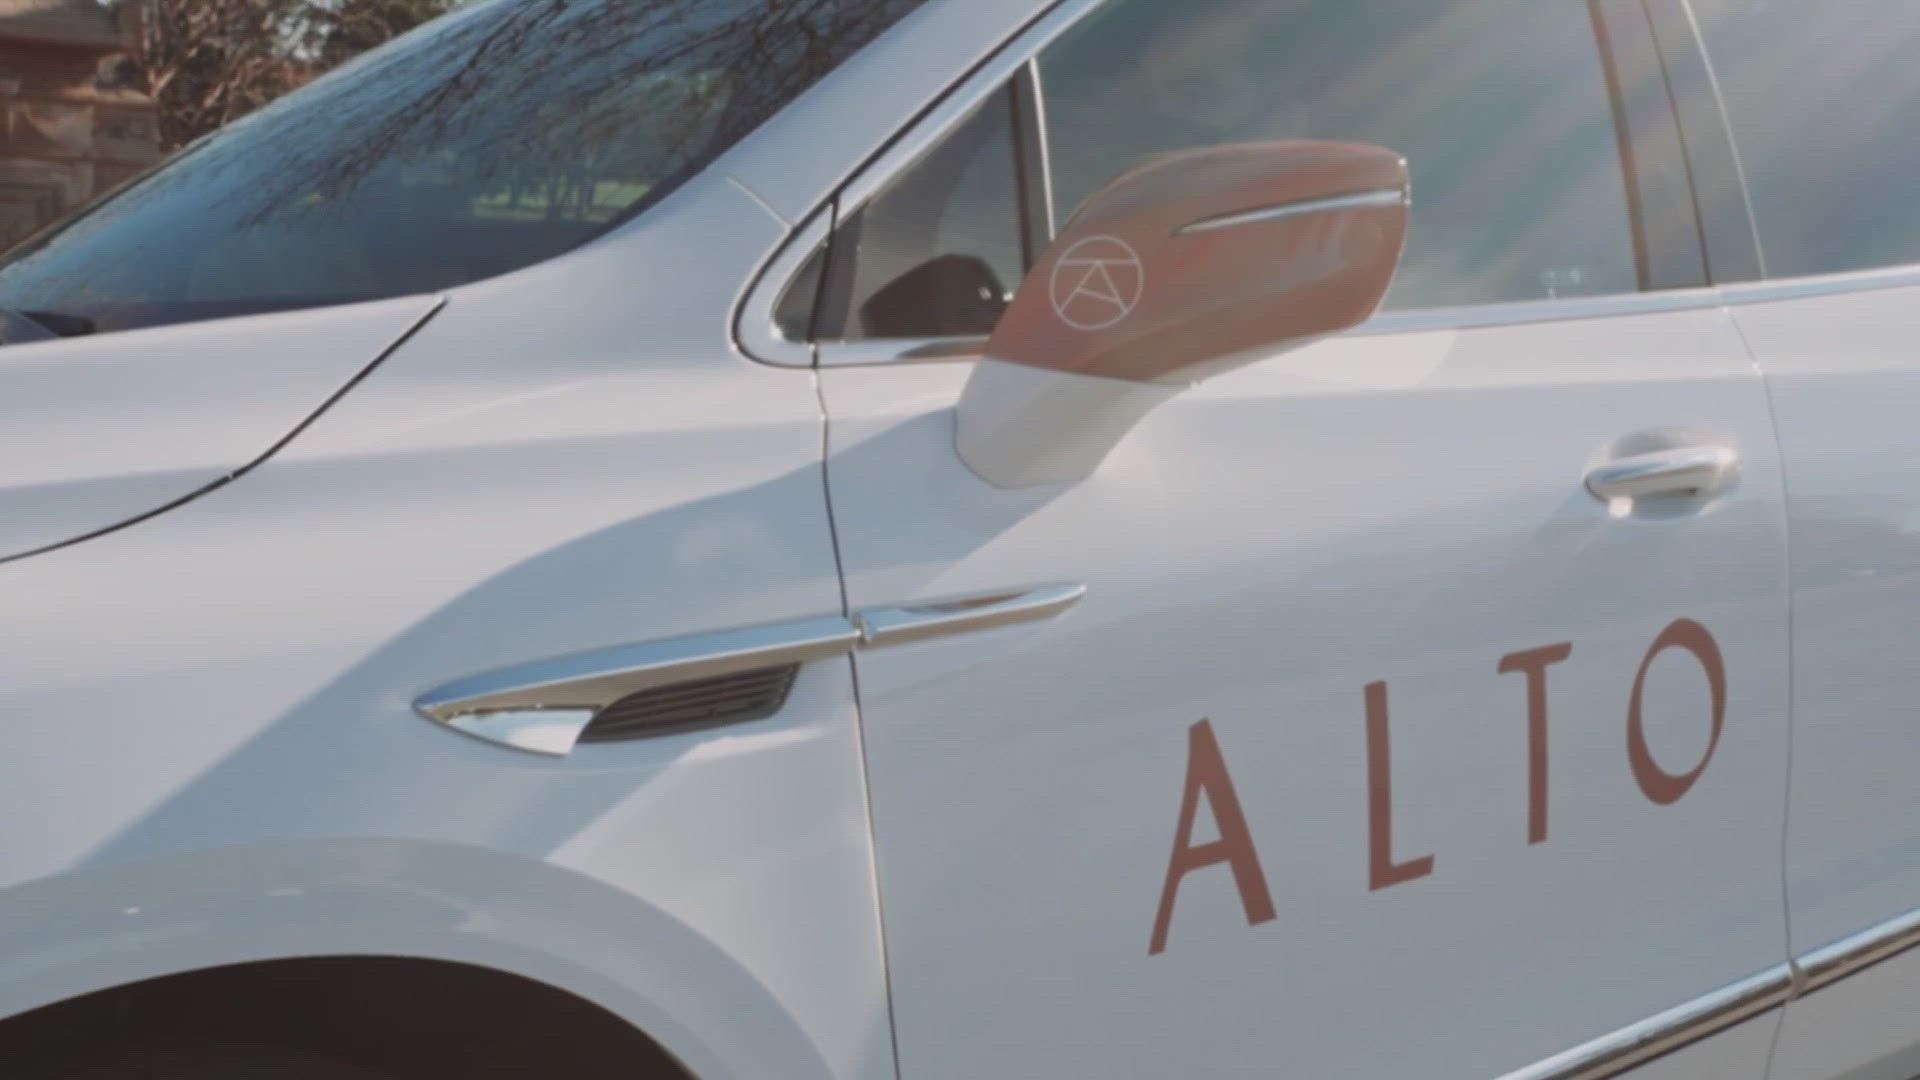 Women typically make up about 30% of most rideshare customers. But the Dallas-based Alto says its ridership is well over 50% female -- and that's intentional.